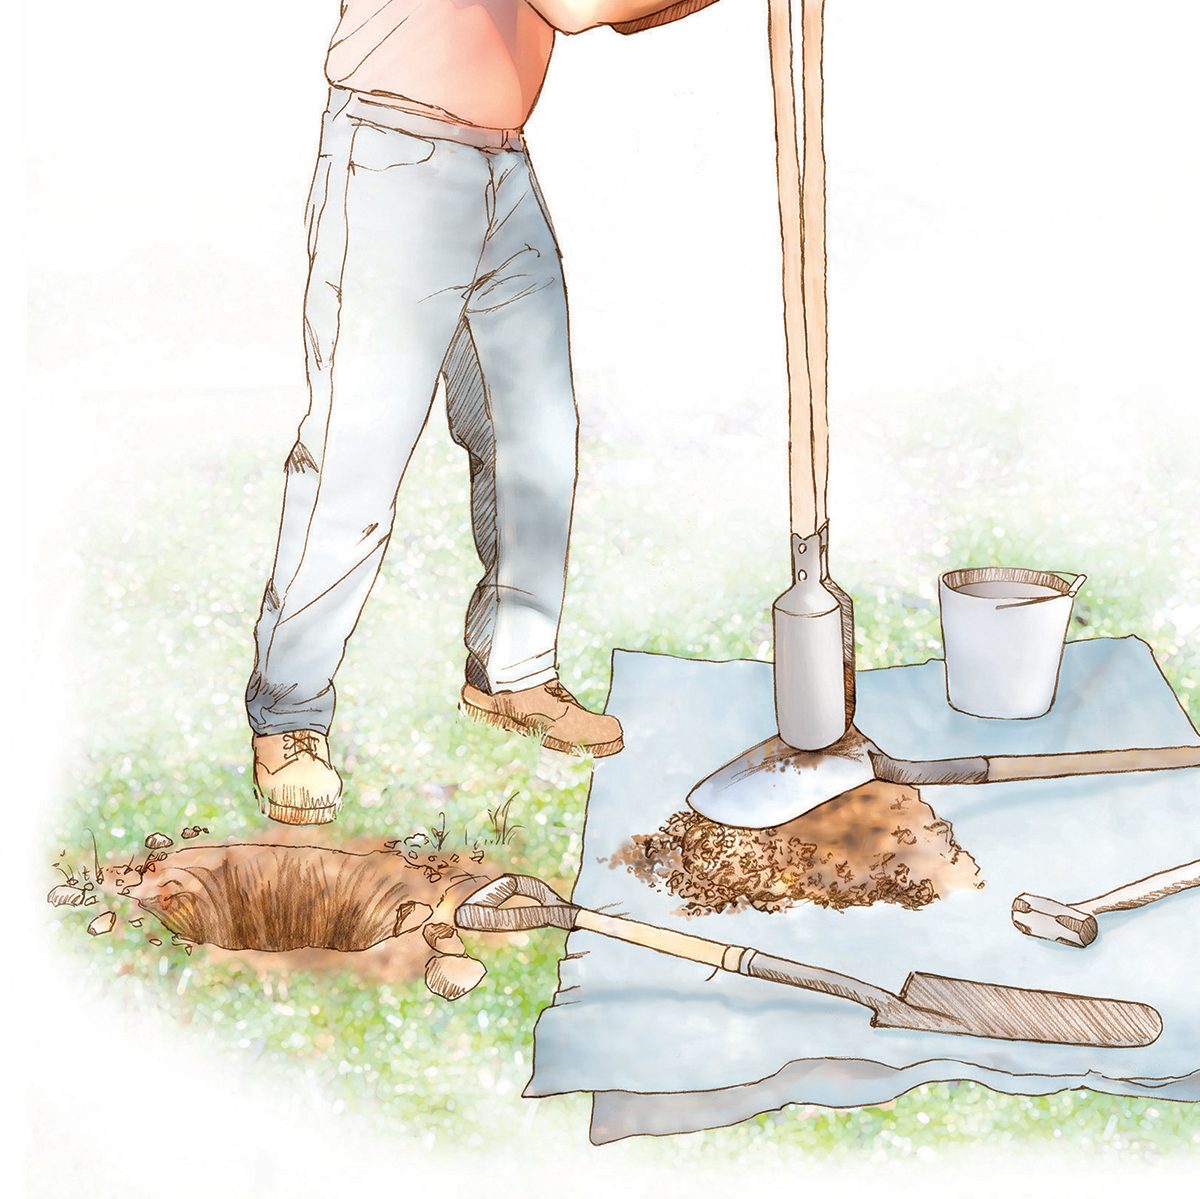 How to Dig Postholes